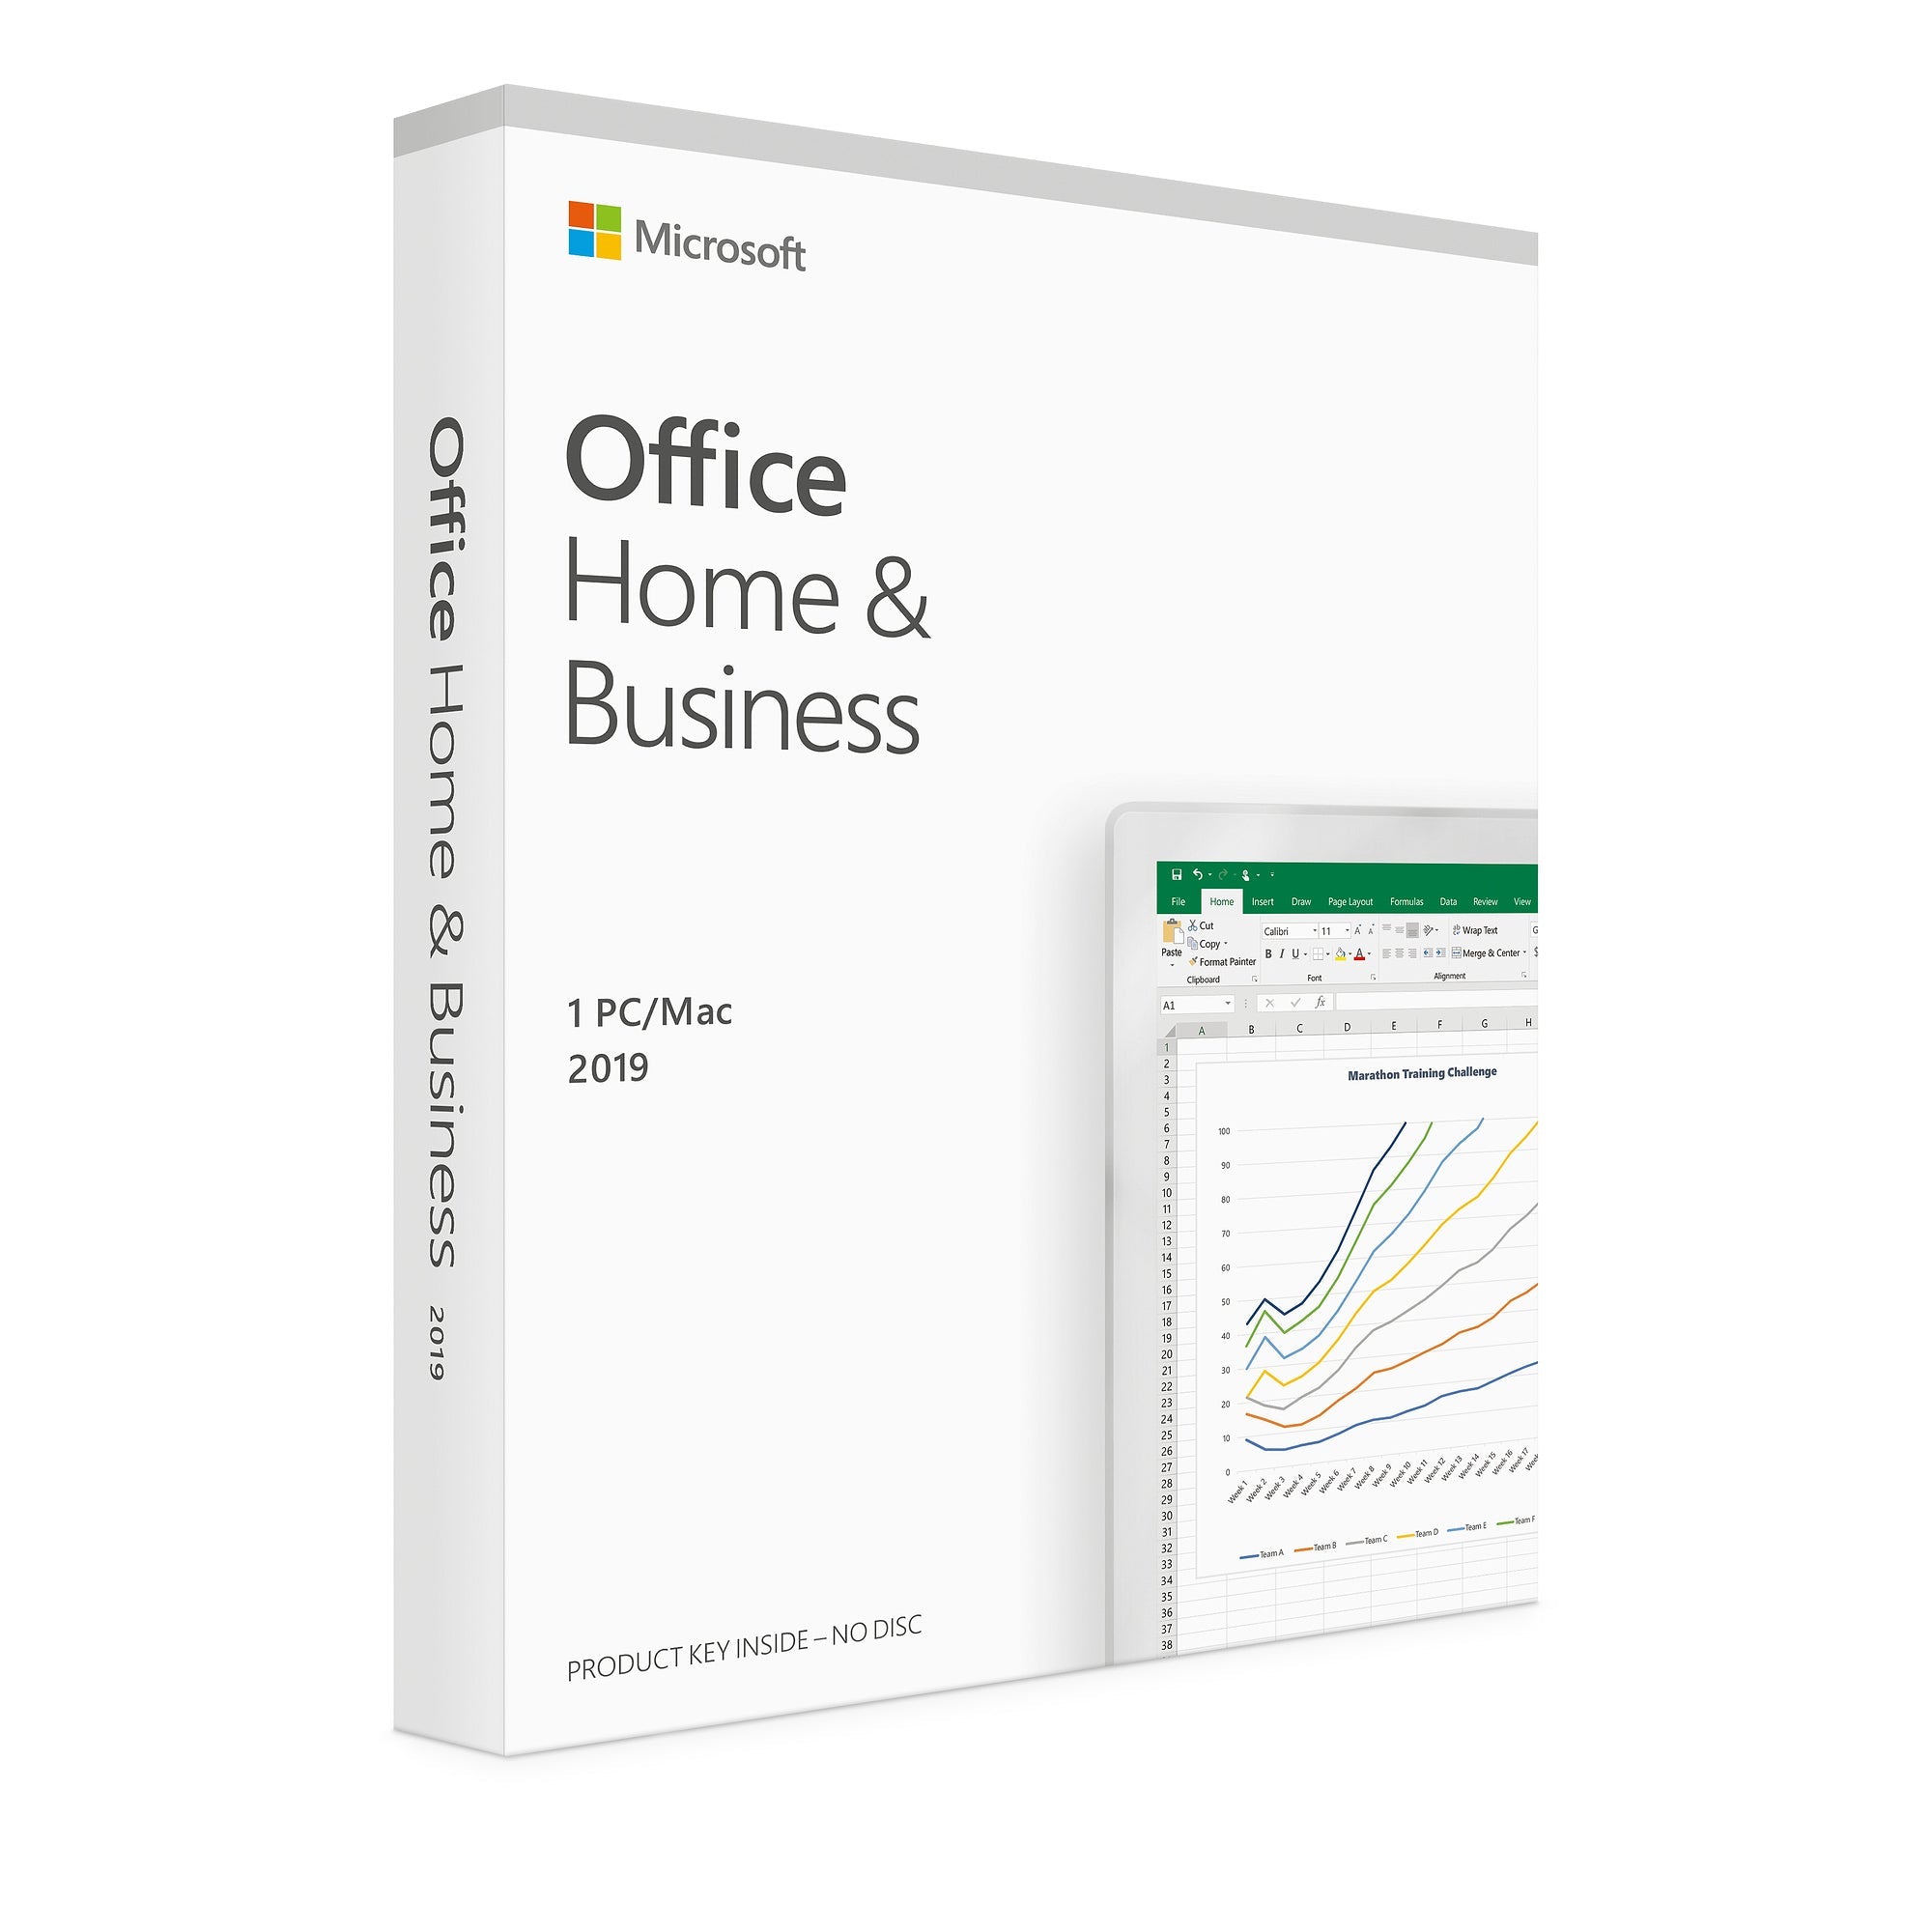 Microsoft Office Home and Business 2019 til Windows - officepakke.dkMicrosoft Office Home and Business 2019 til Windowsofficepakke.dkofficepakke.dk